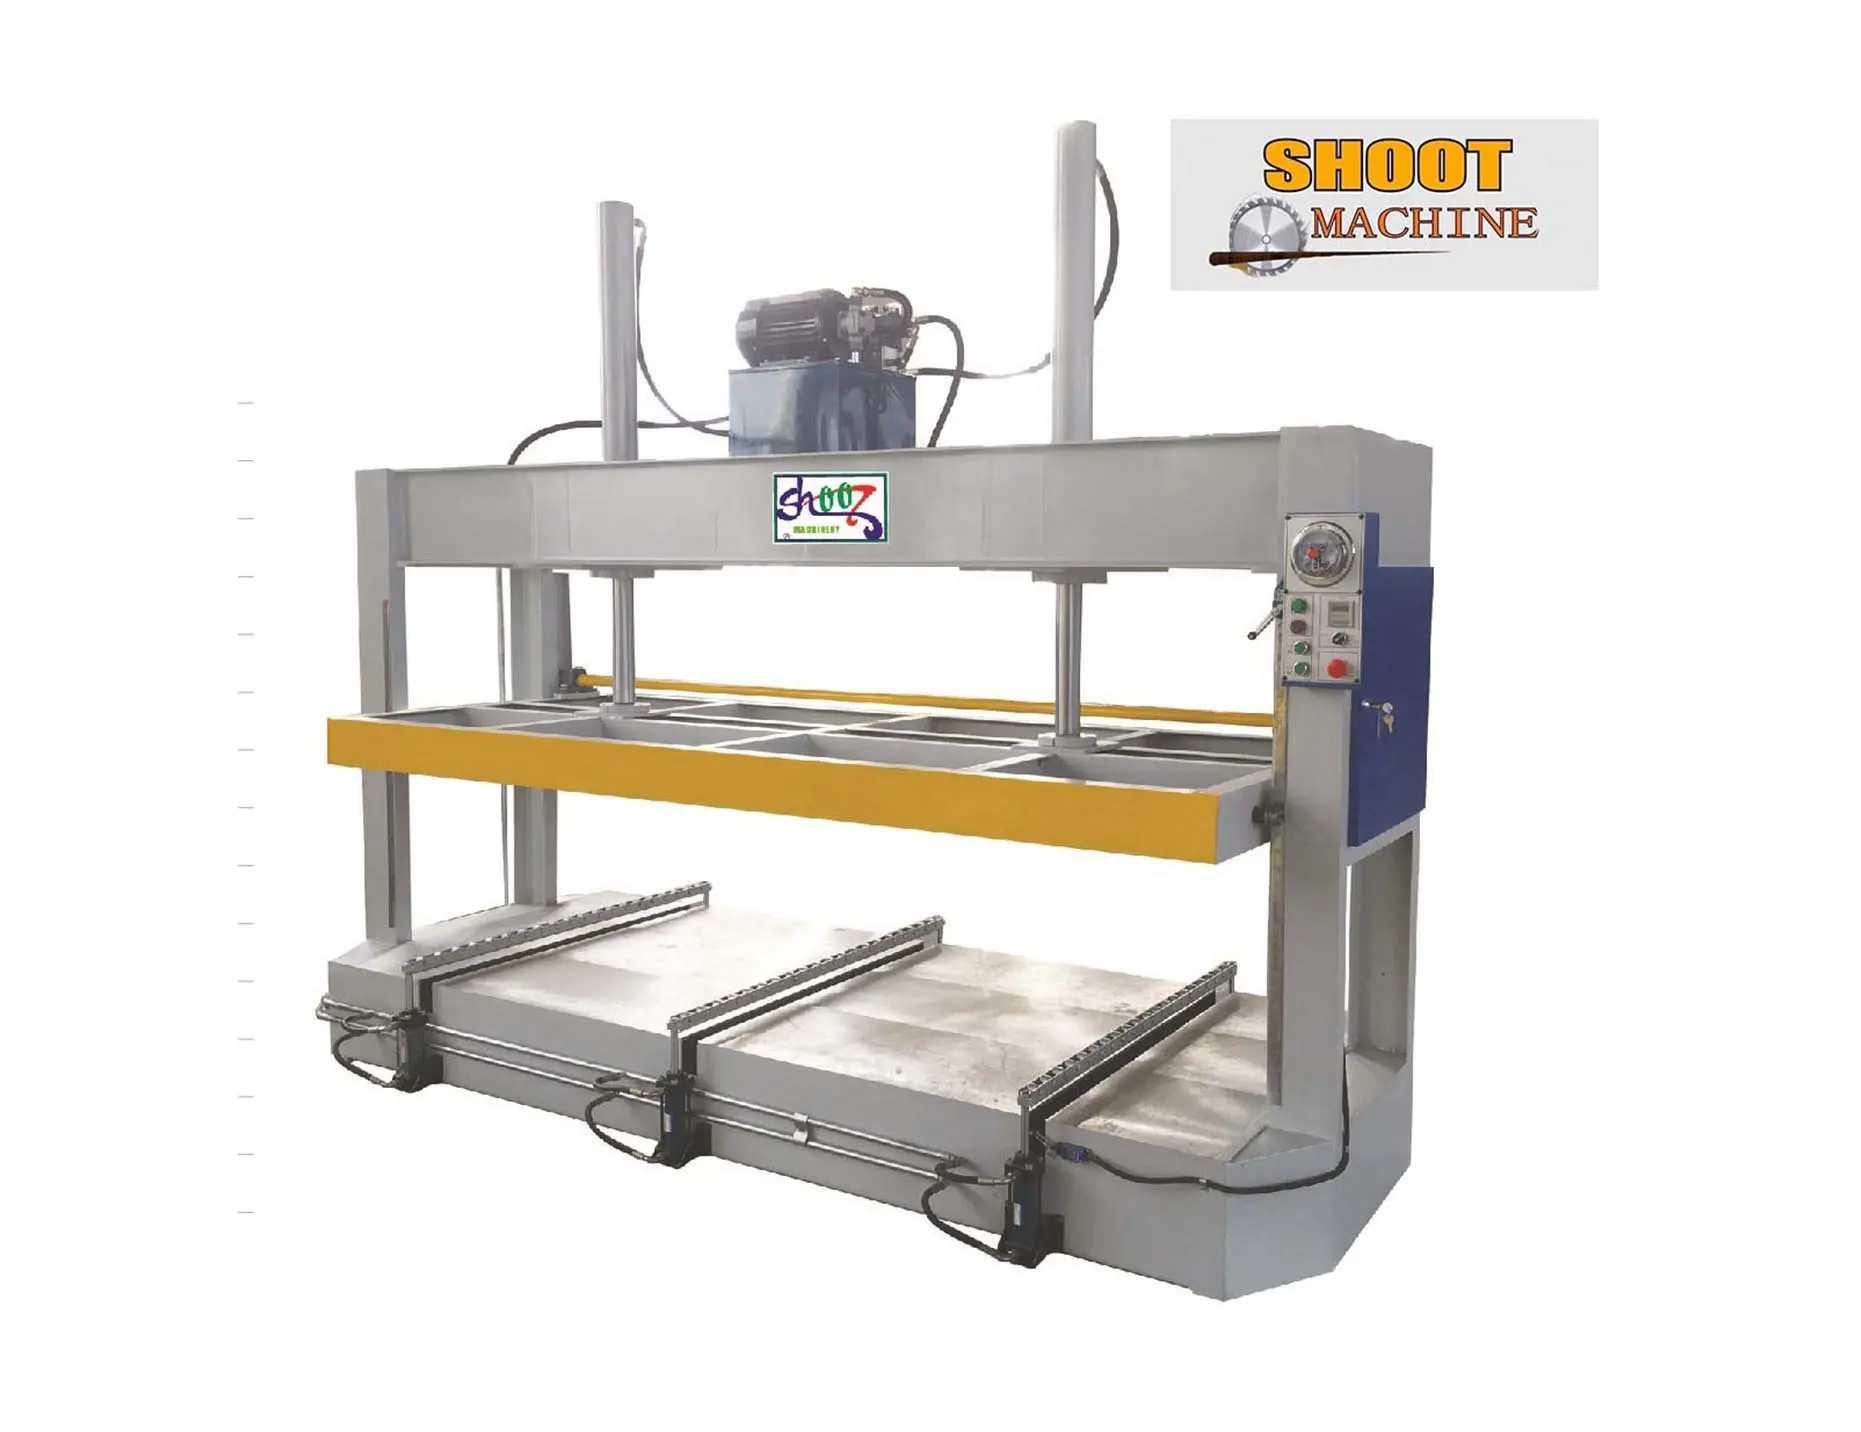 Shoot Brand Cold Press Machine With Feeder Function, SHY-3000